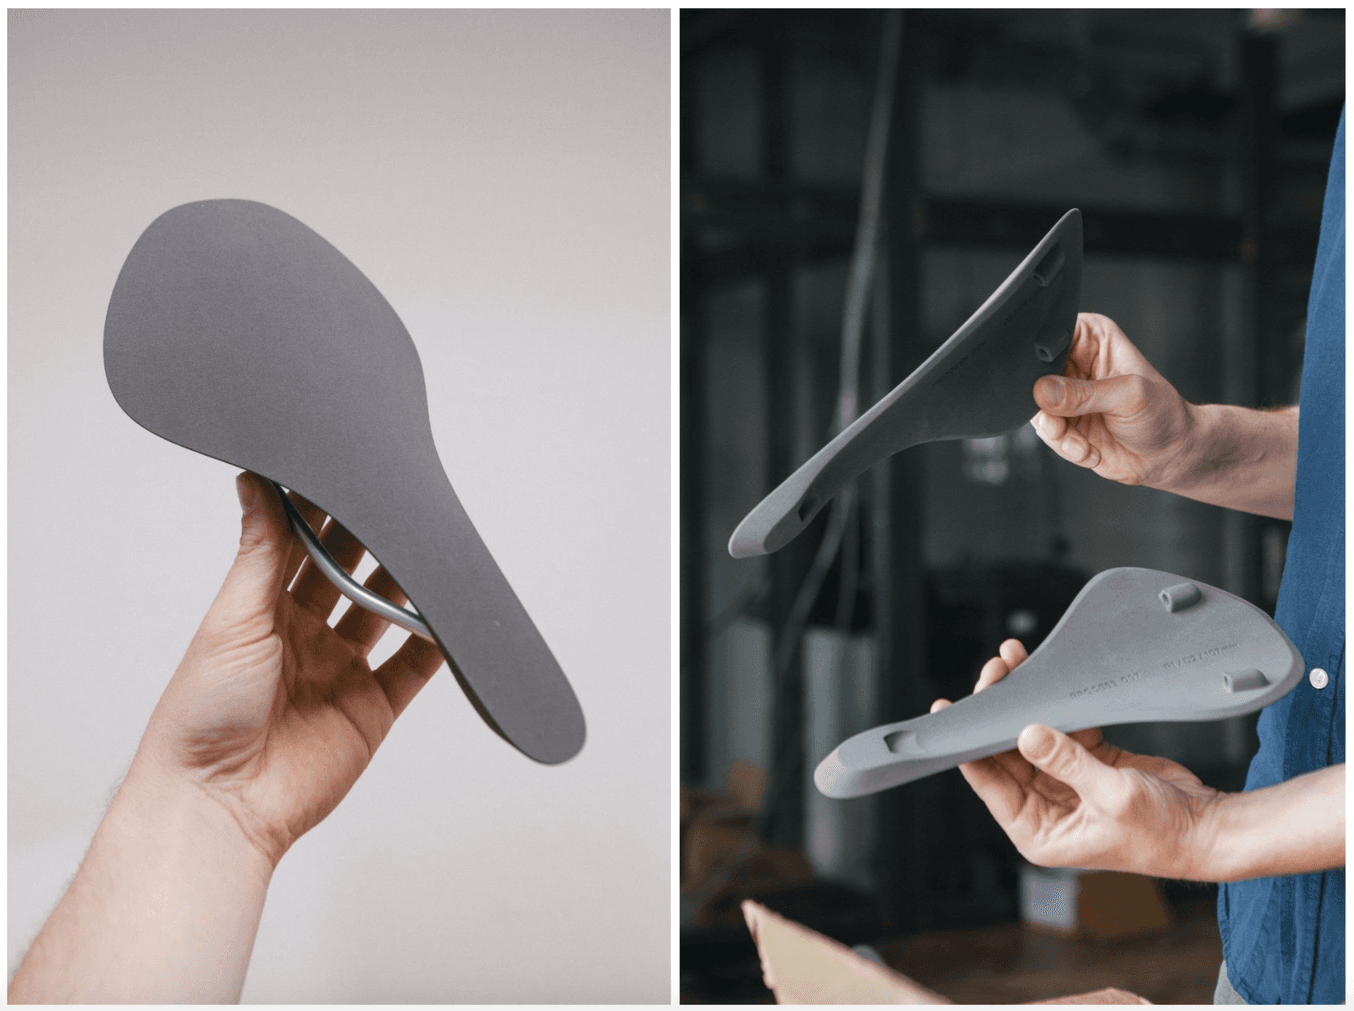 The base was printed using the Fuse 1 and Nylon 12, which is characterized by its high tensile strength, ductility and stability that the saddle needs.